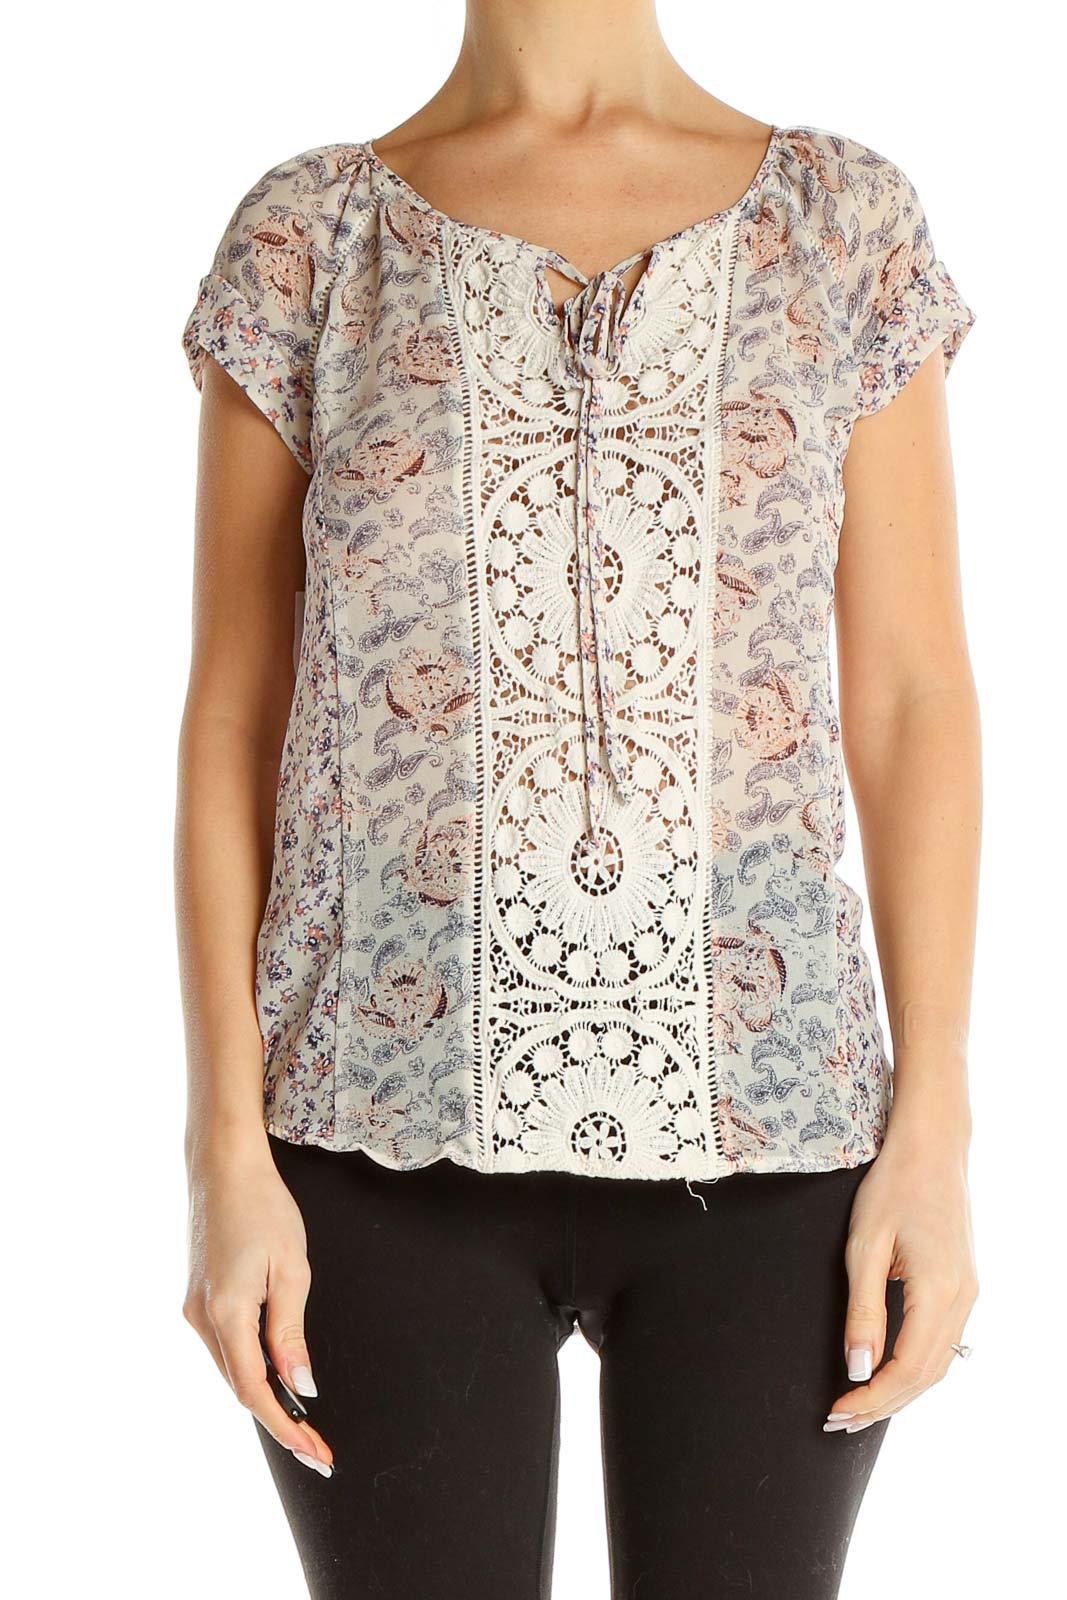 Beige Paisley Embroidered Bohemian Blouse Front